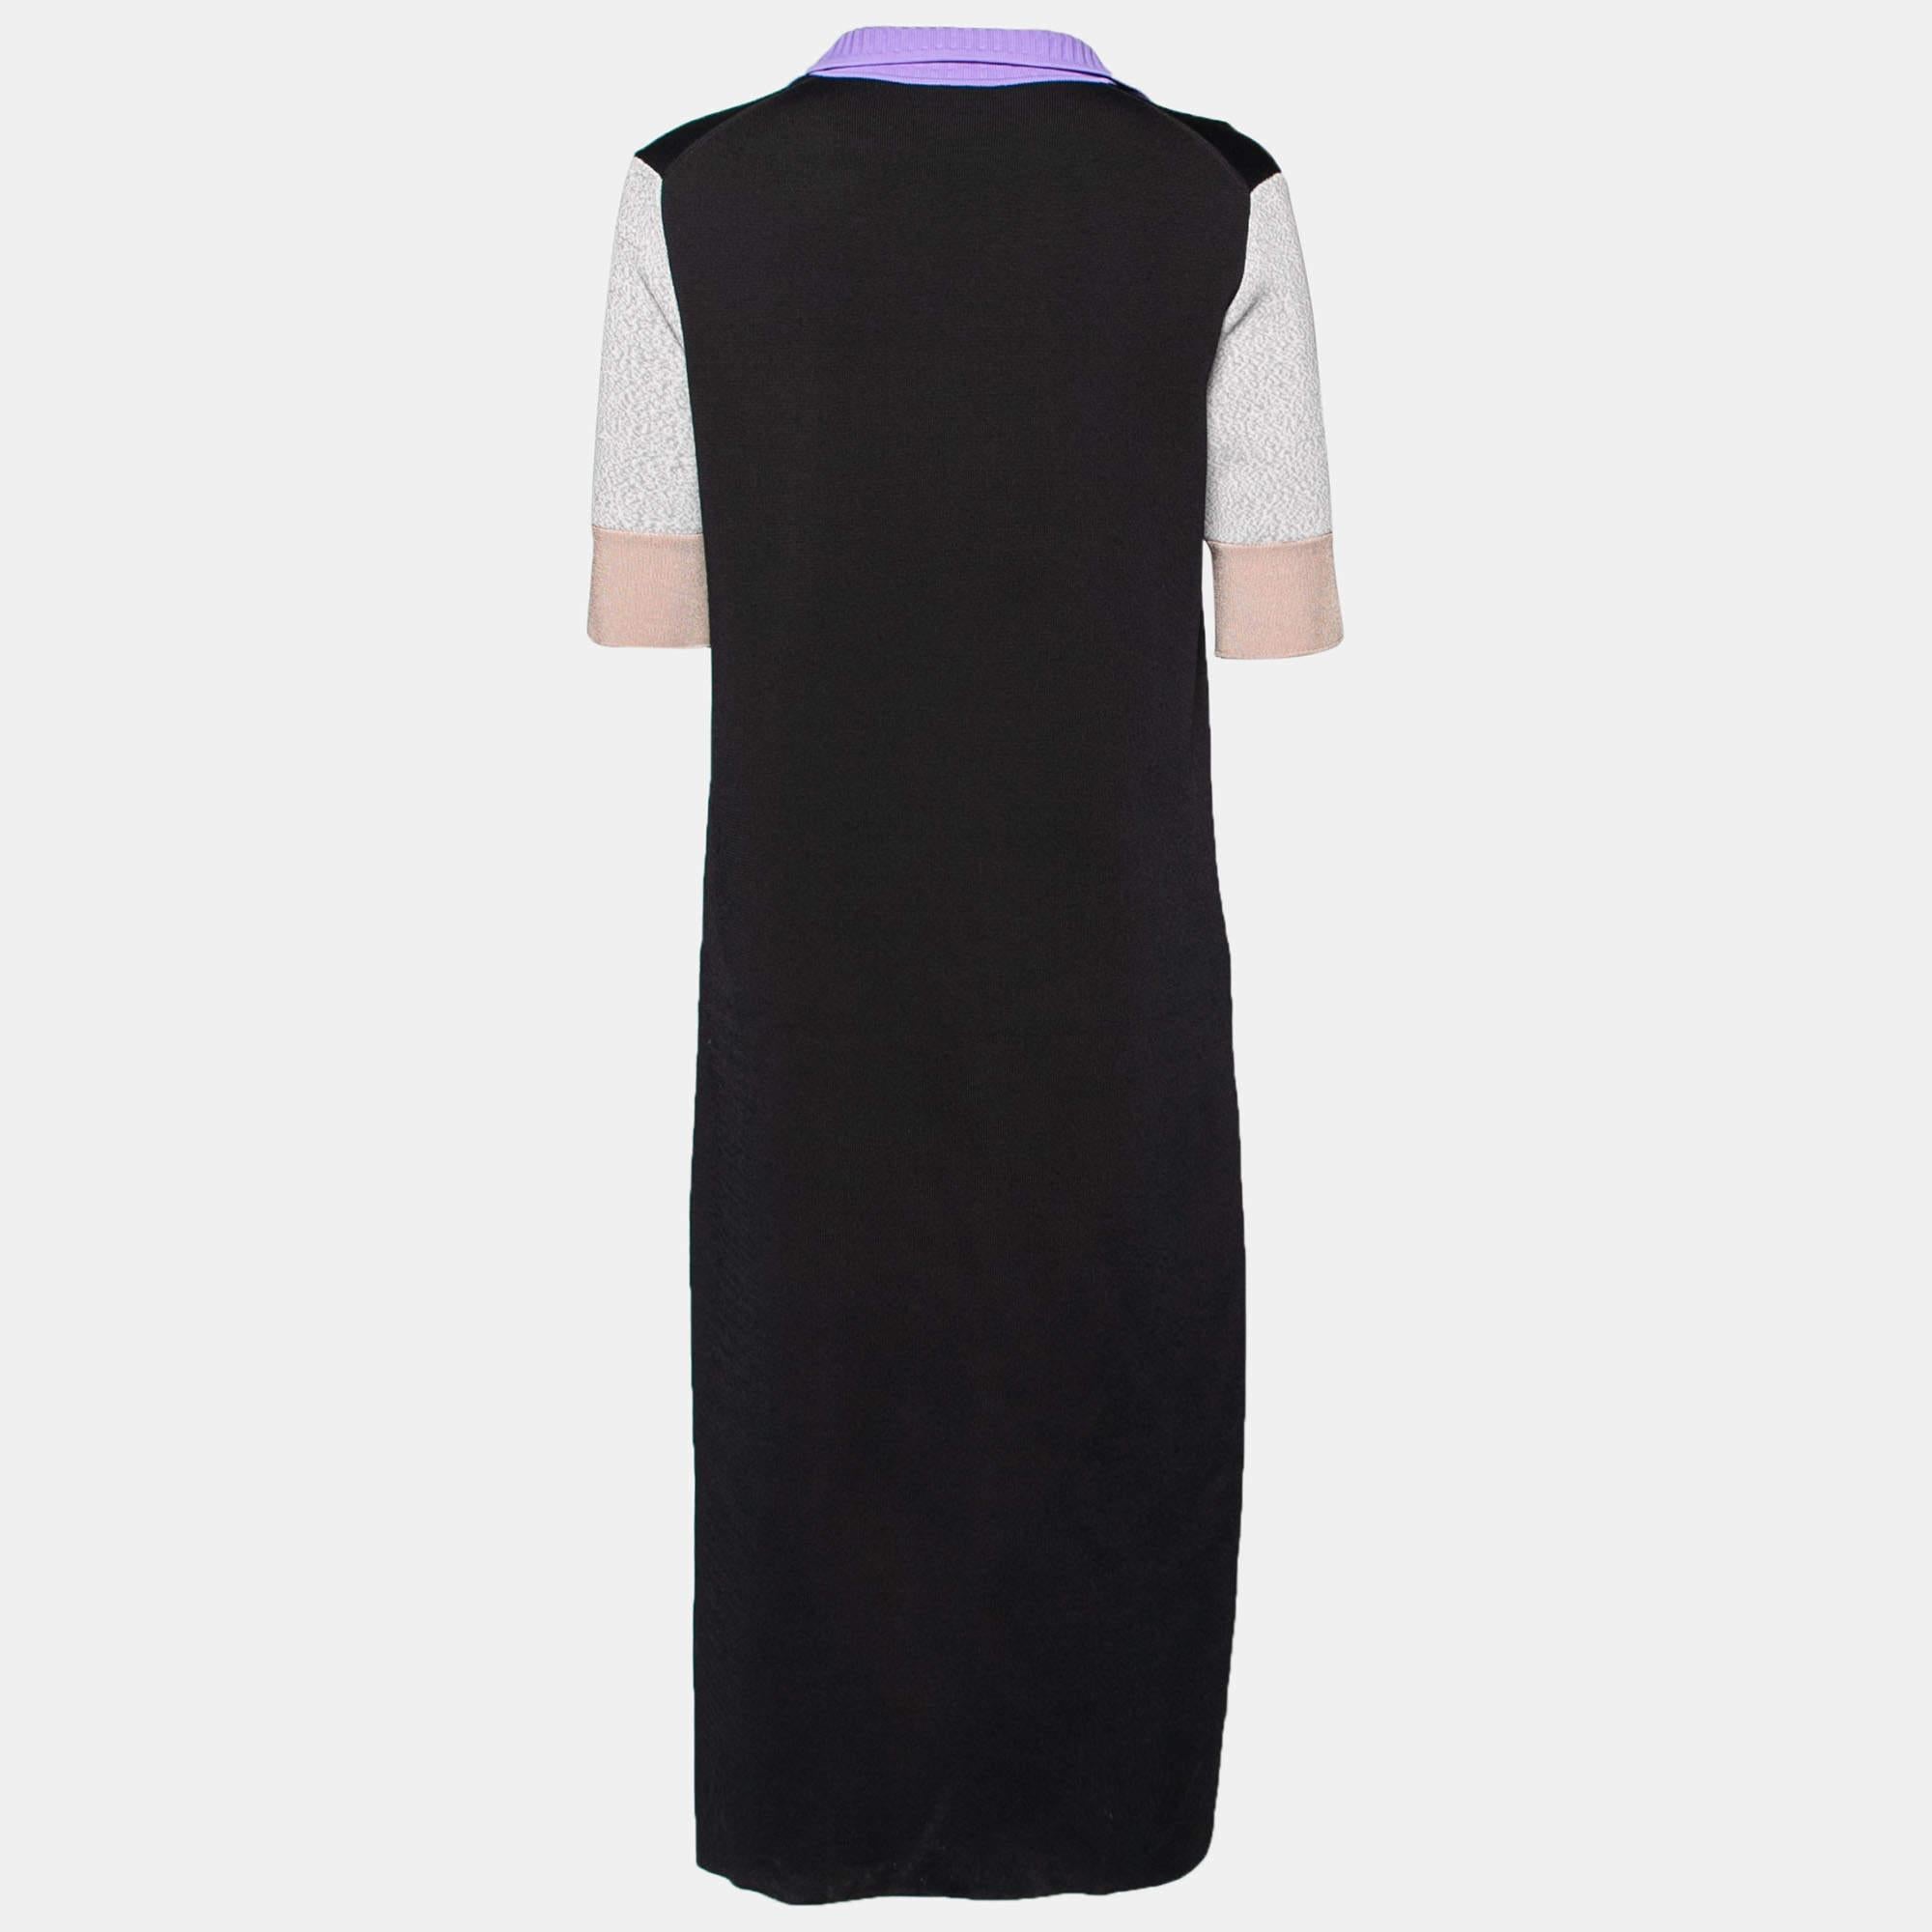 Upgrade your dress collection with this fabulous, colour-block dress by Balenciaga. Crafted from fine fabrics, it has a collar and a simple silhouette. It will look amazing with mules and a sling bag.

